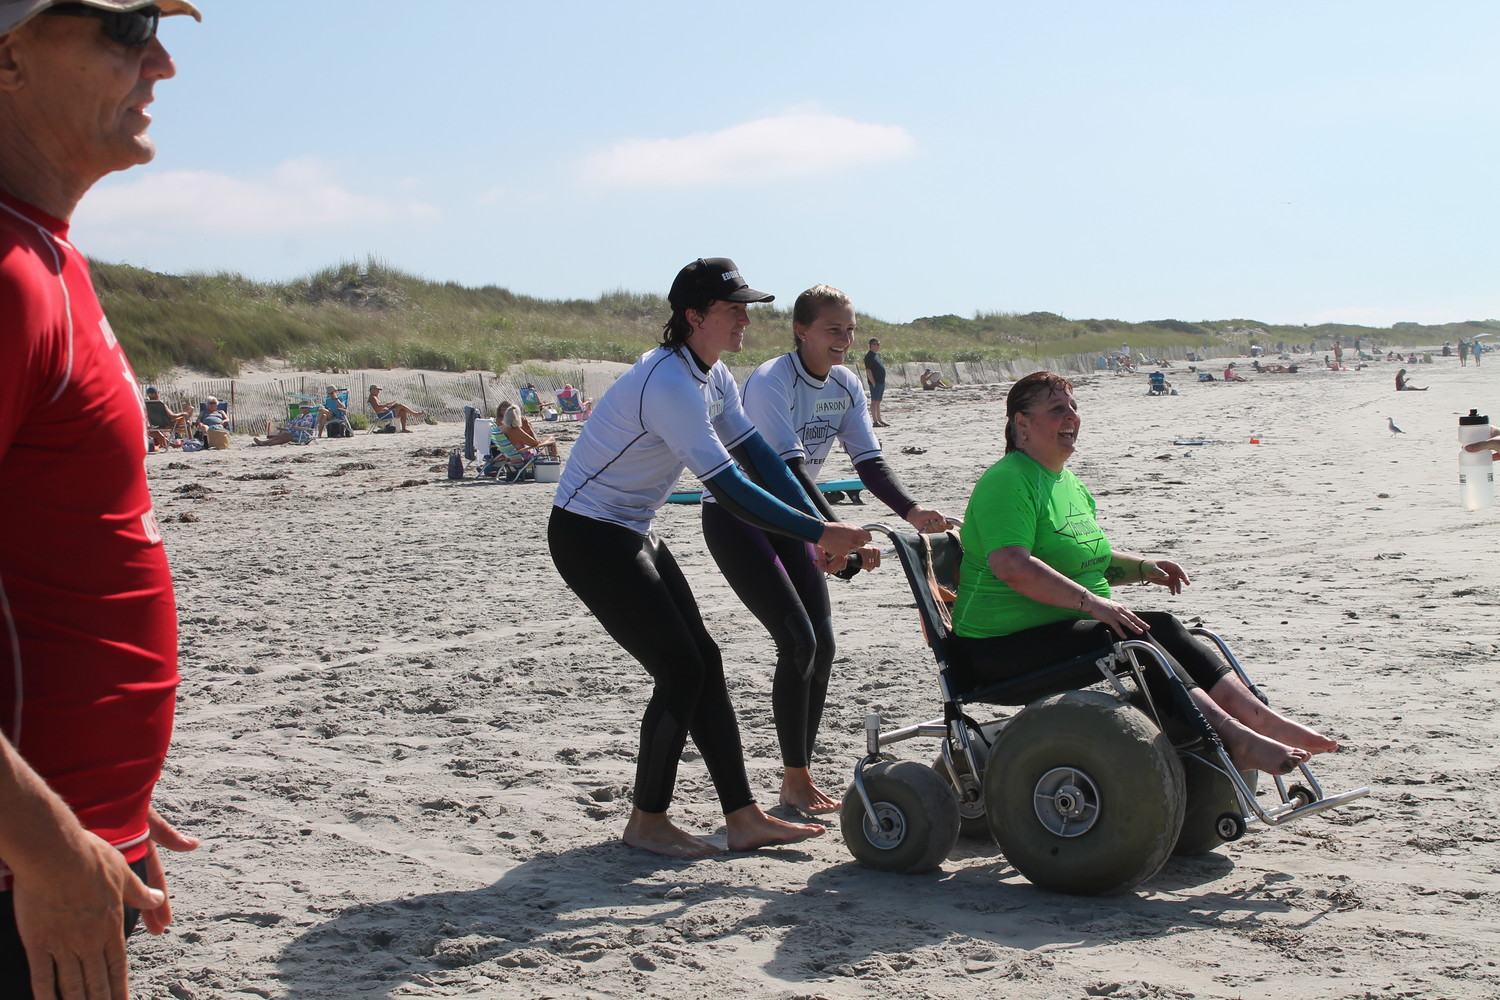 AmpSurf volunteers leading Tina Pedersen, a.k.a. "Miss Wheelchair RI", to the water's edge to prepare for an unforgettable surfing experience.